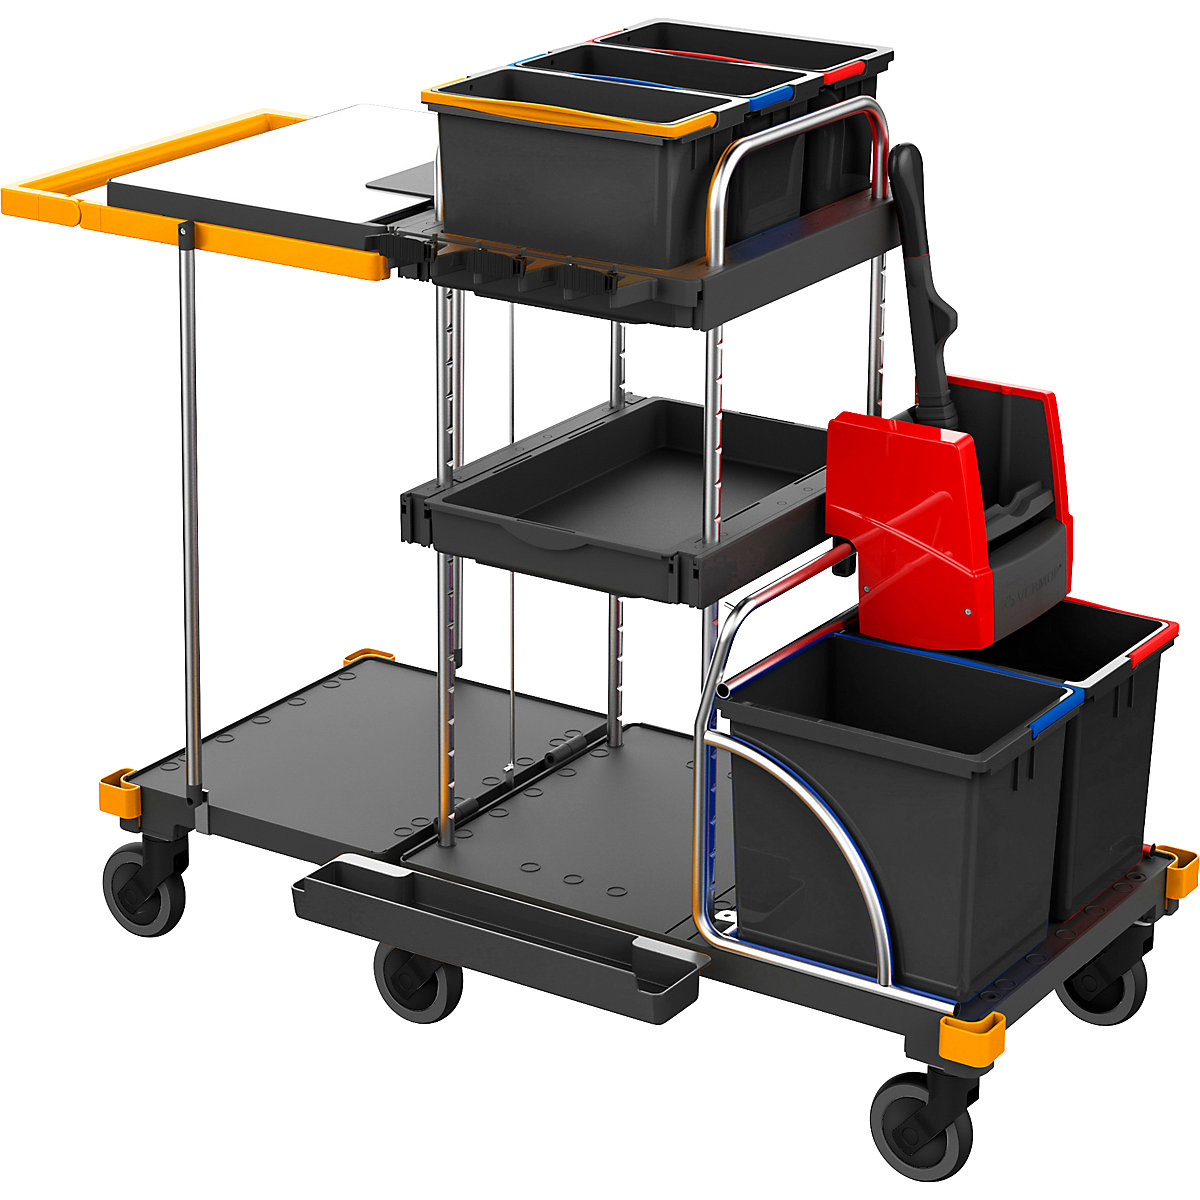 EQUIPE cleaning trolley - Vermop